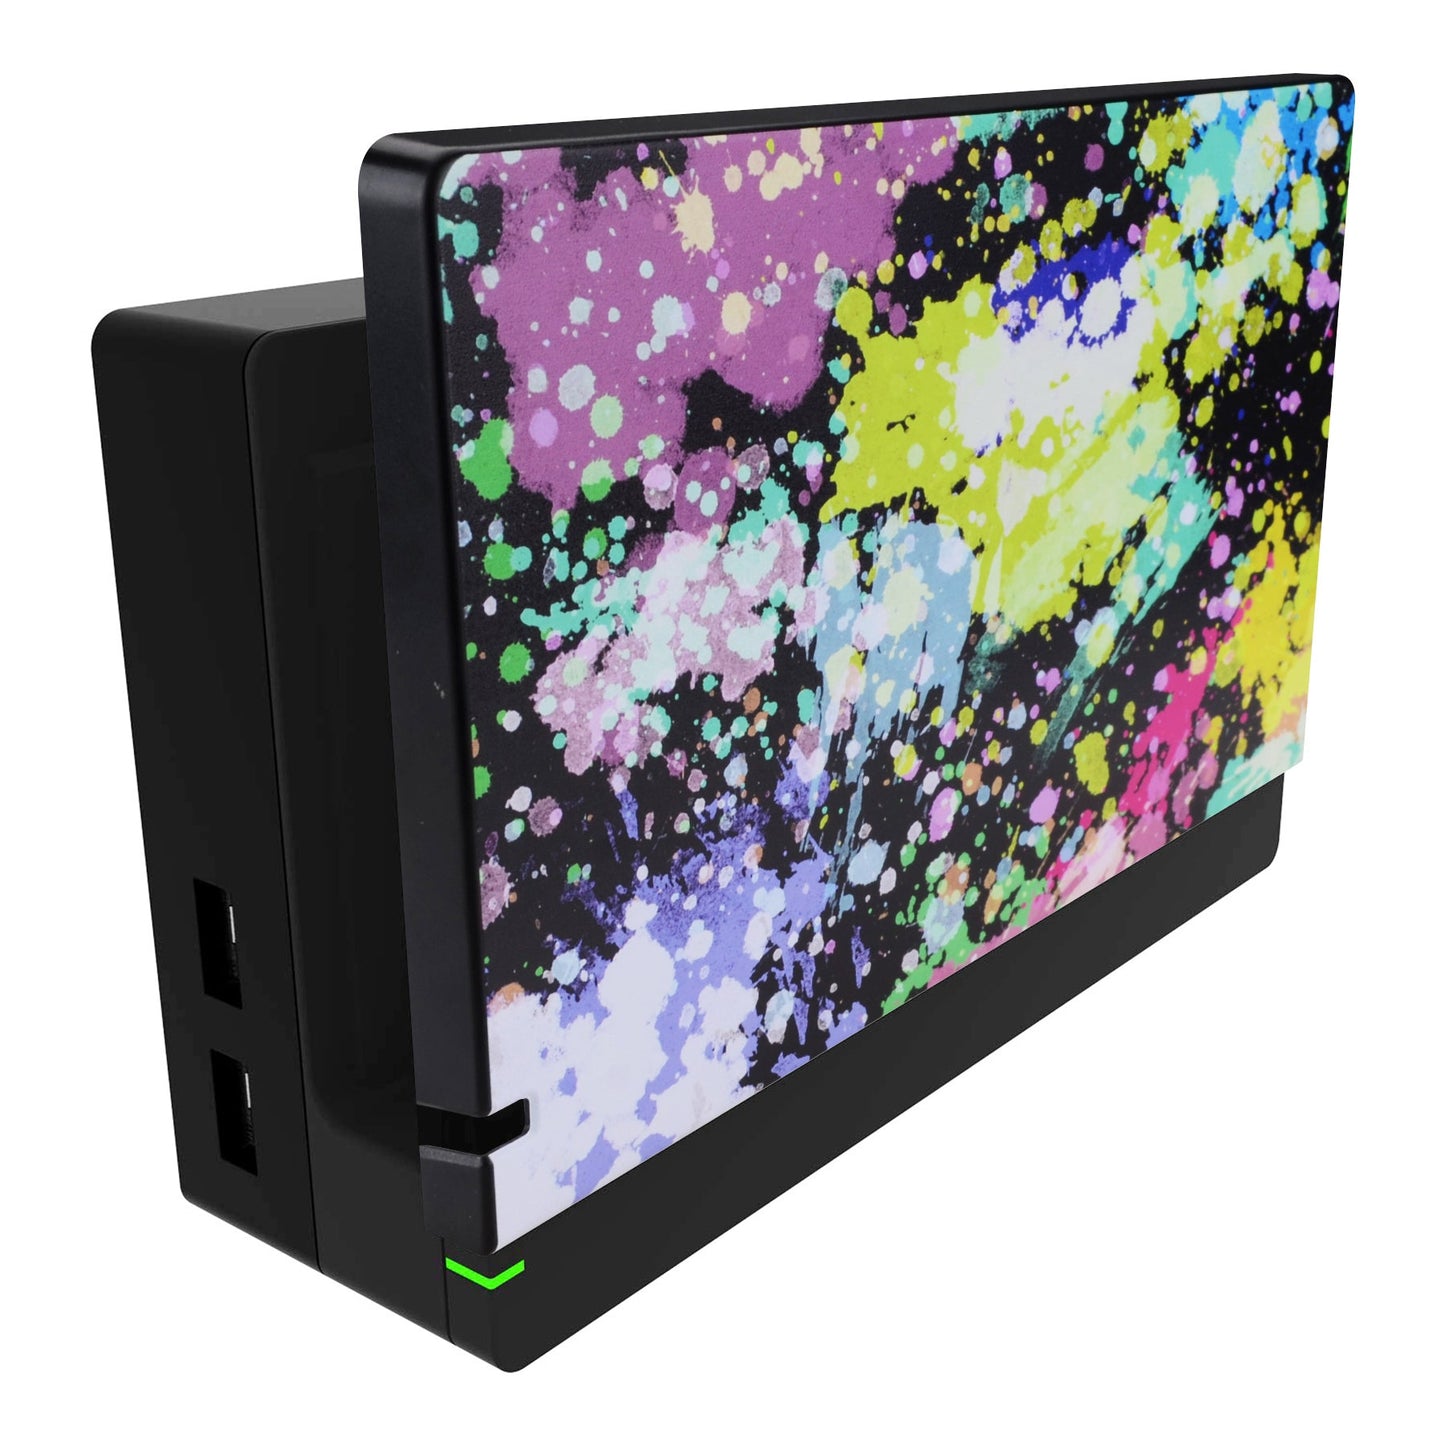 PlayVital Watercolour Splash Patterned Custom Protective Case for NS Switch Charging Dock, Dust Anti Scratch Dust Hard Cover for NS Switch Dock - Dock NOT Included - NTG7006 PlayVital